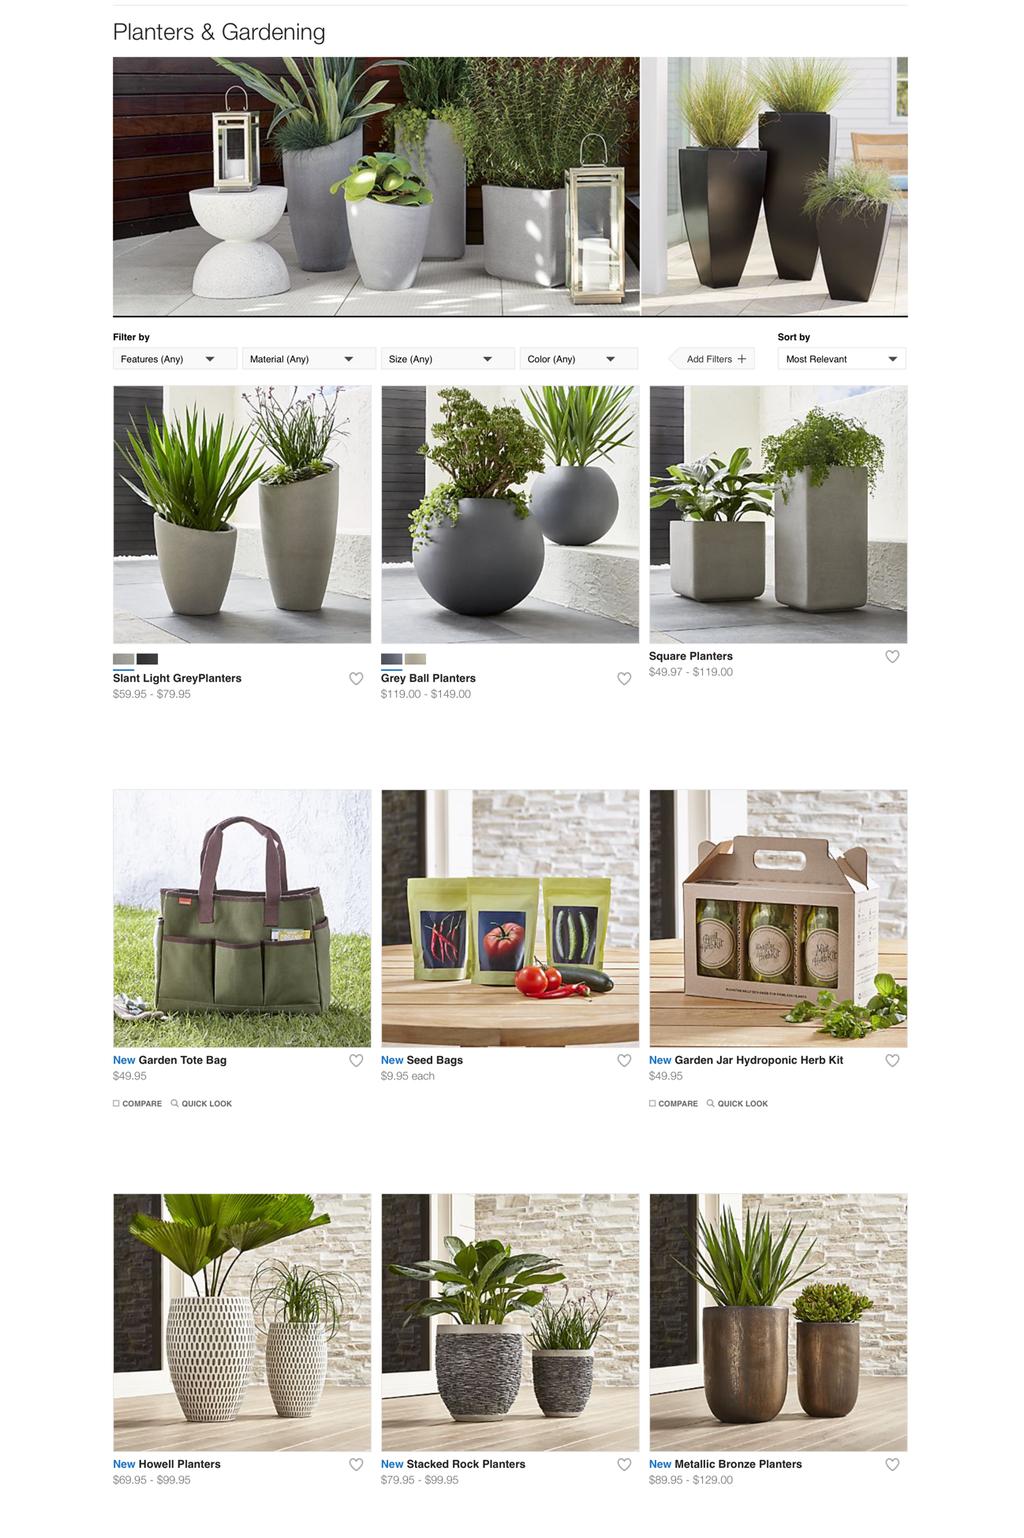 Influencer: Crate & Barrel Product Selection This is a good example of a simple and intuitive product selection page.